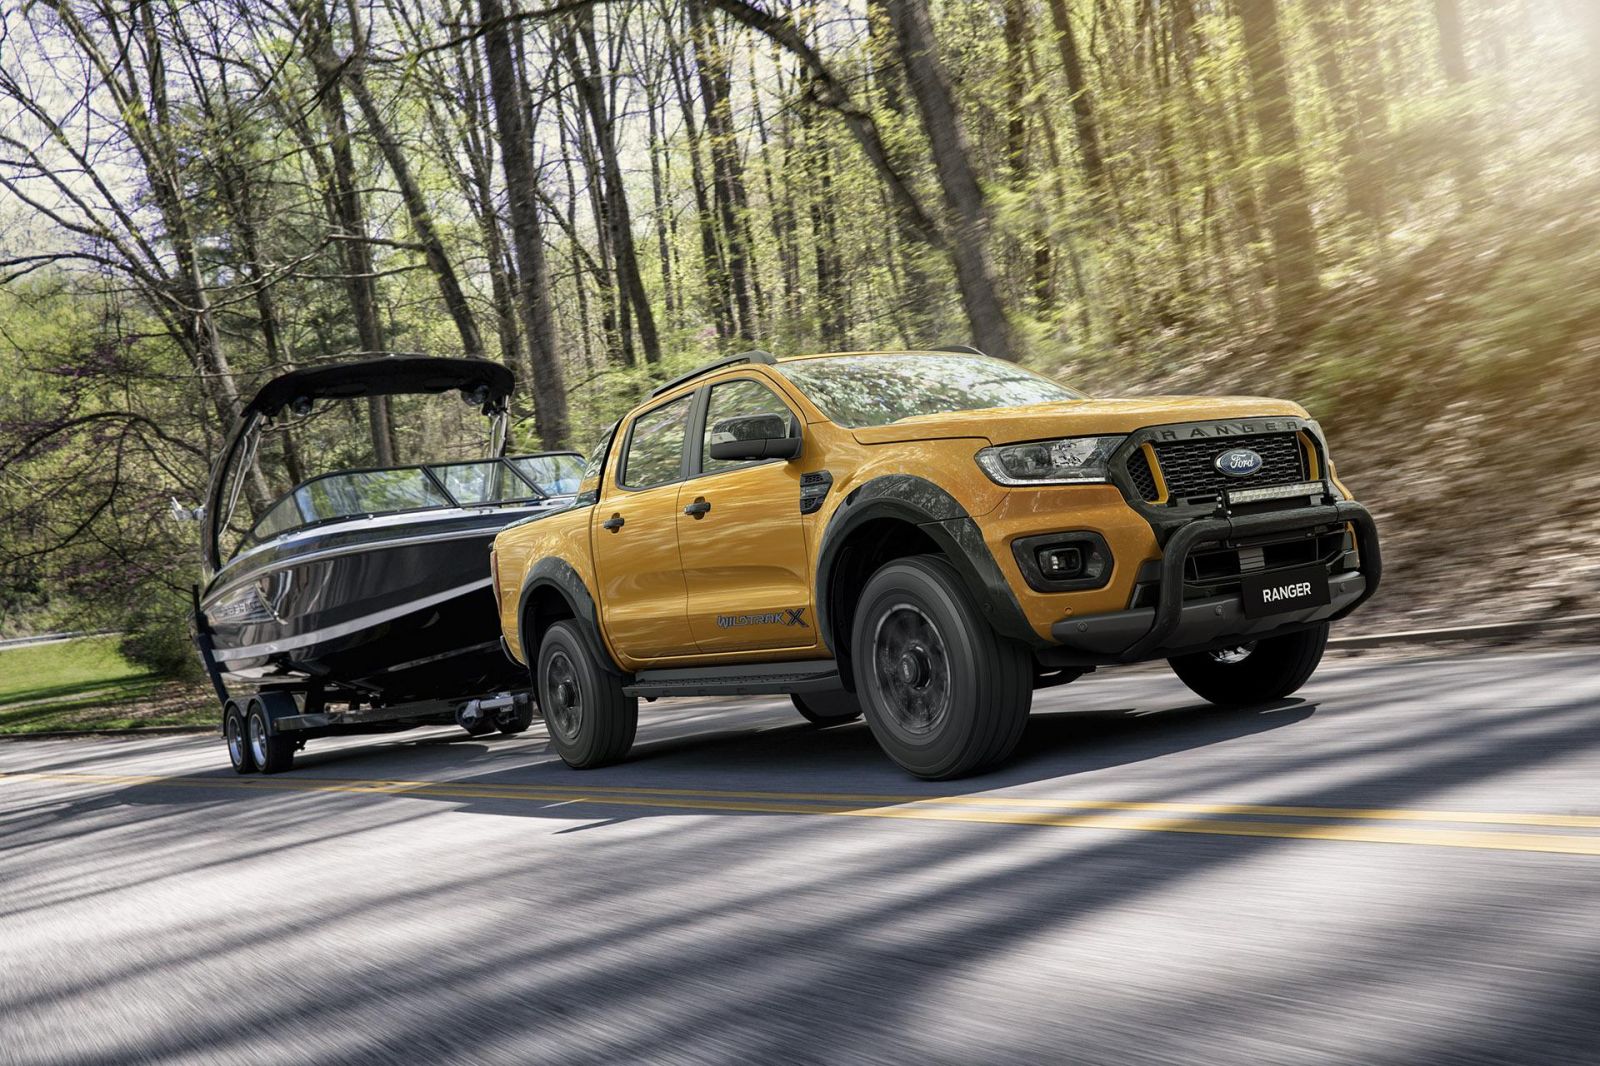 2021 Ford Ranger Wildtrak X price and specs, here in February | CarExpert